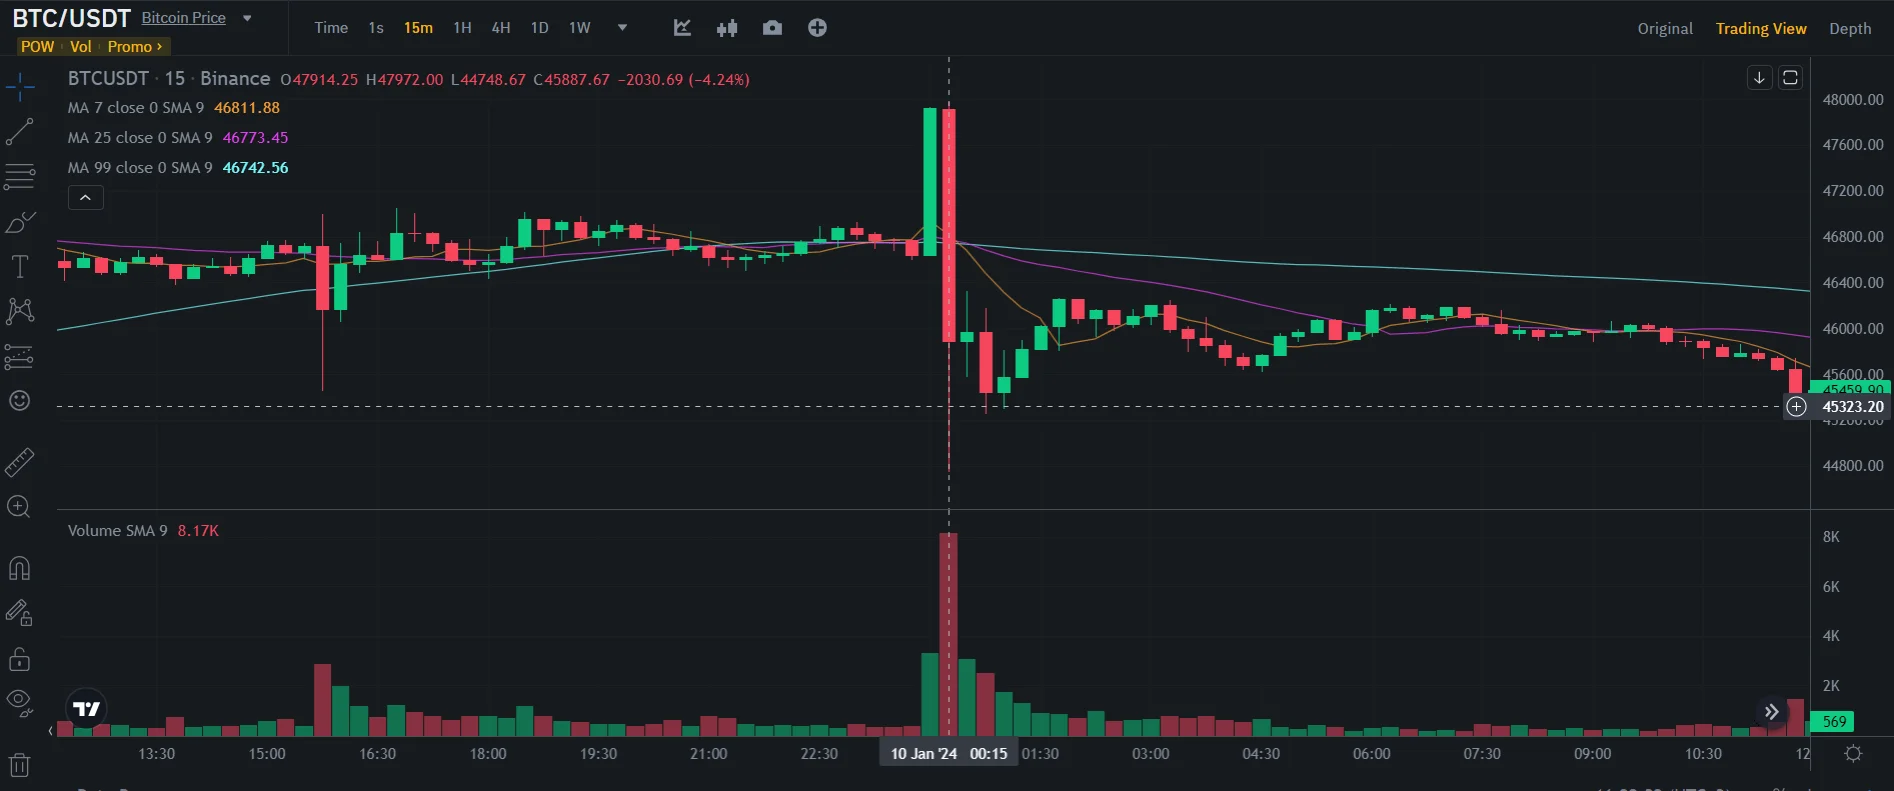 Sharp drop just around the time of the announcement (Binance)